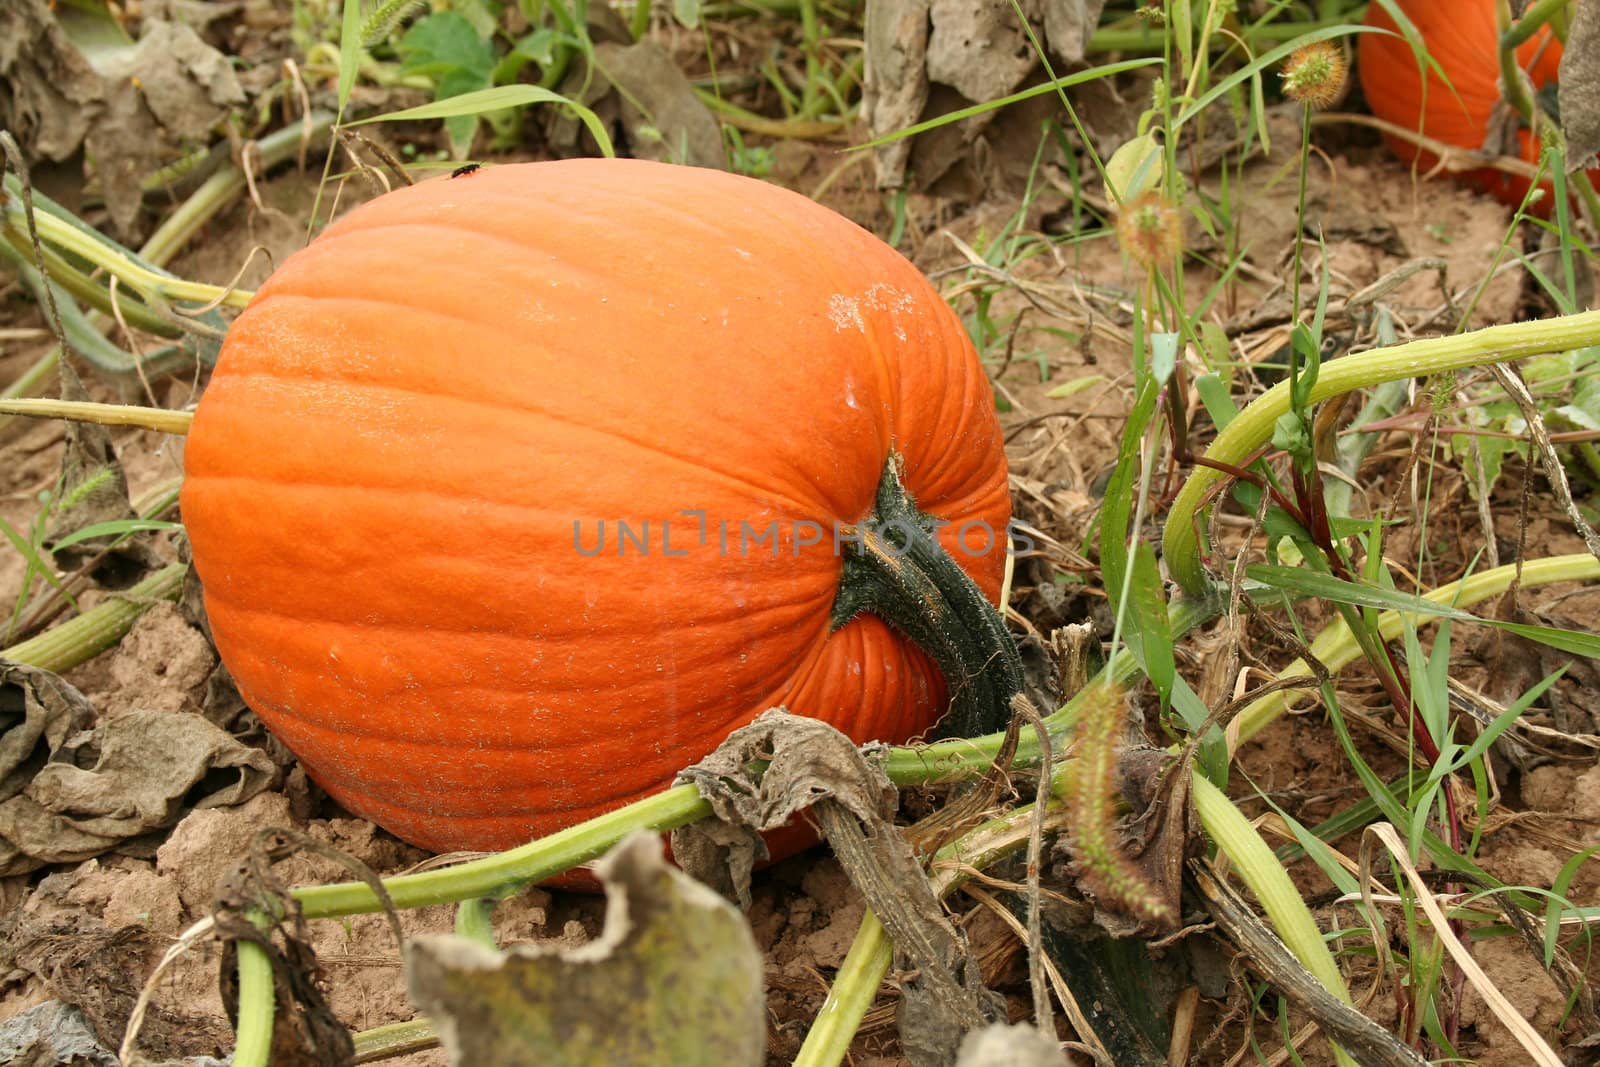 Pumpkin in the field ready for picking